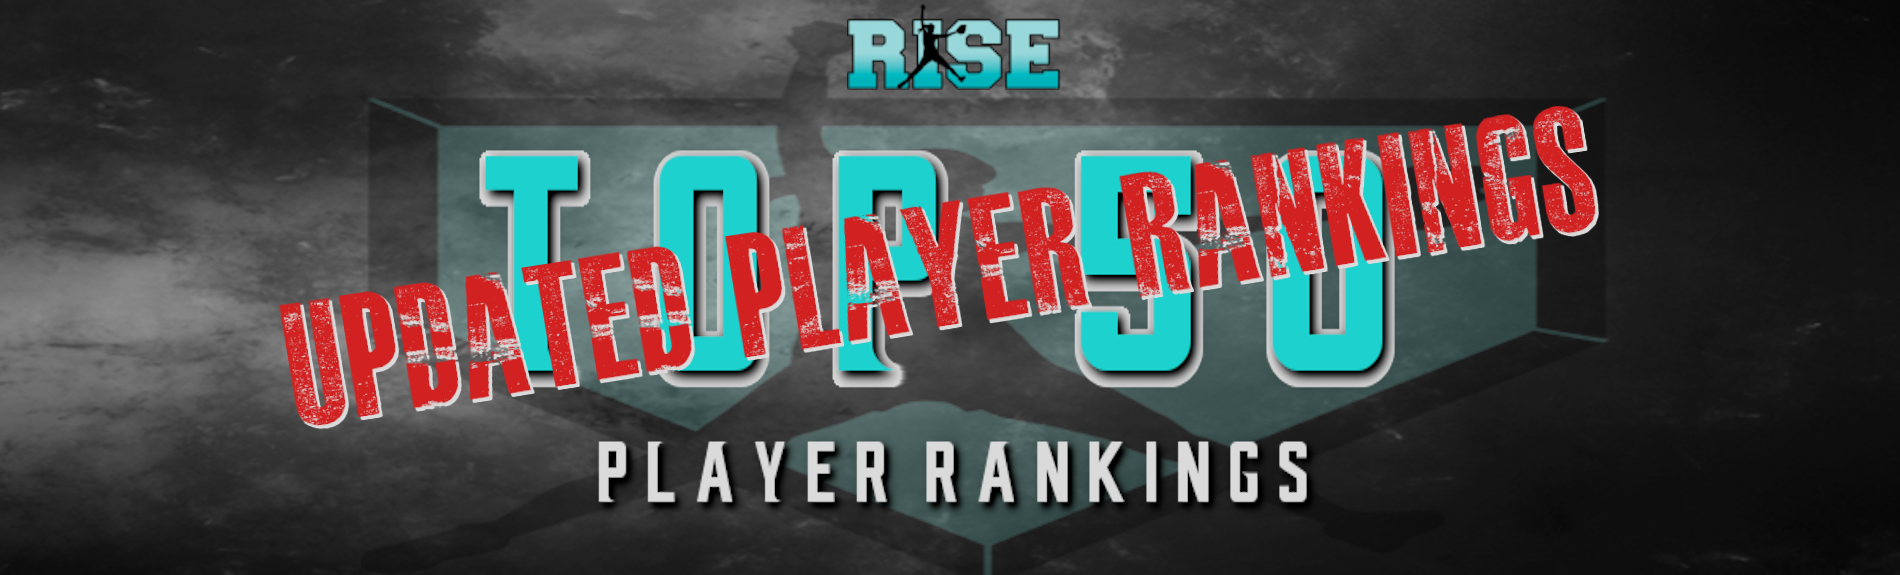 RISE “Top 50” UPDATED Player Rankings